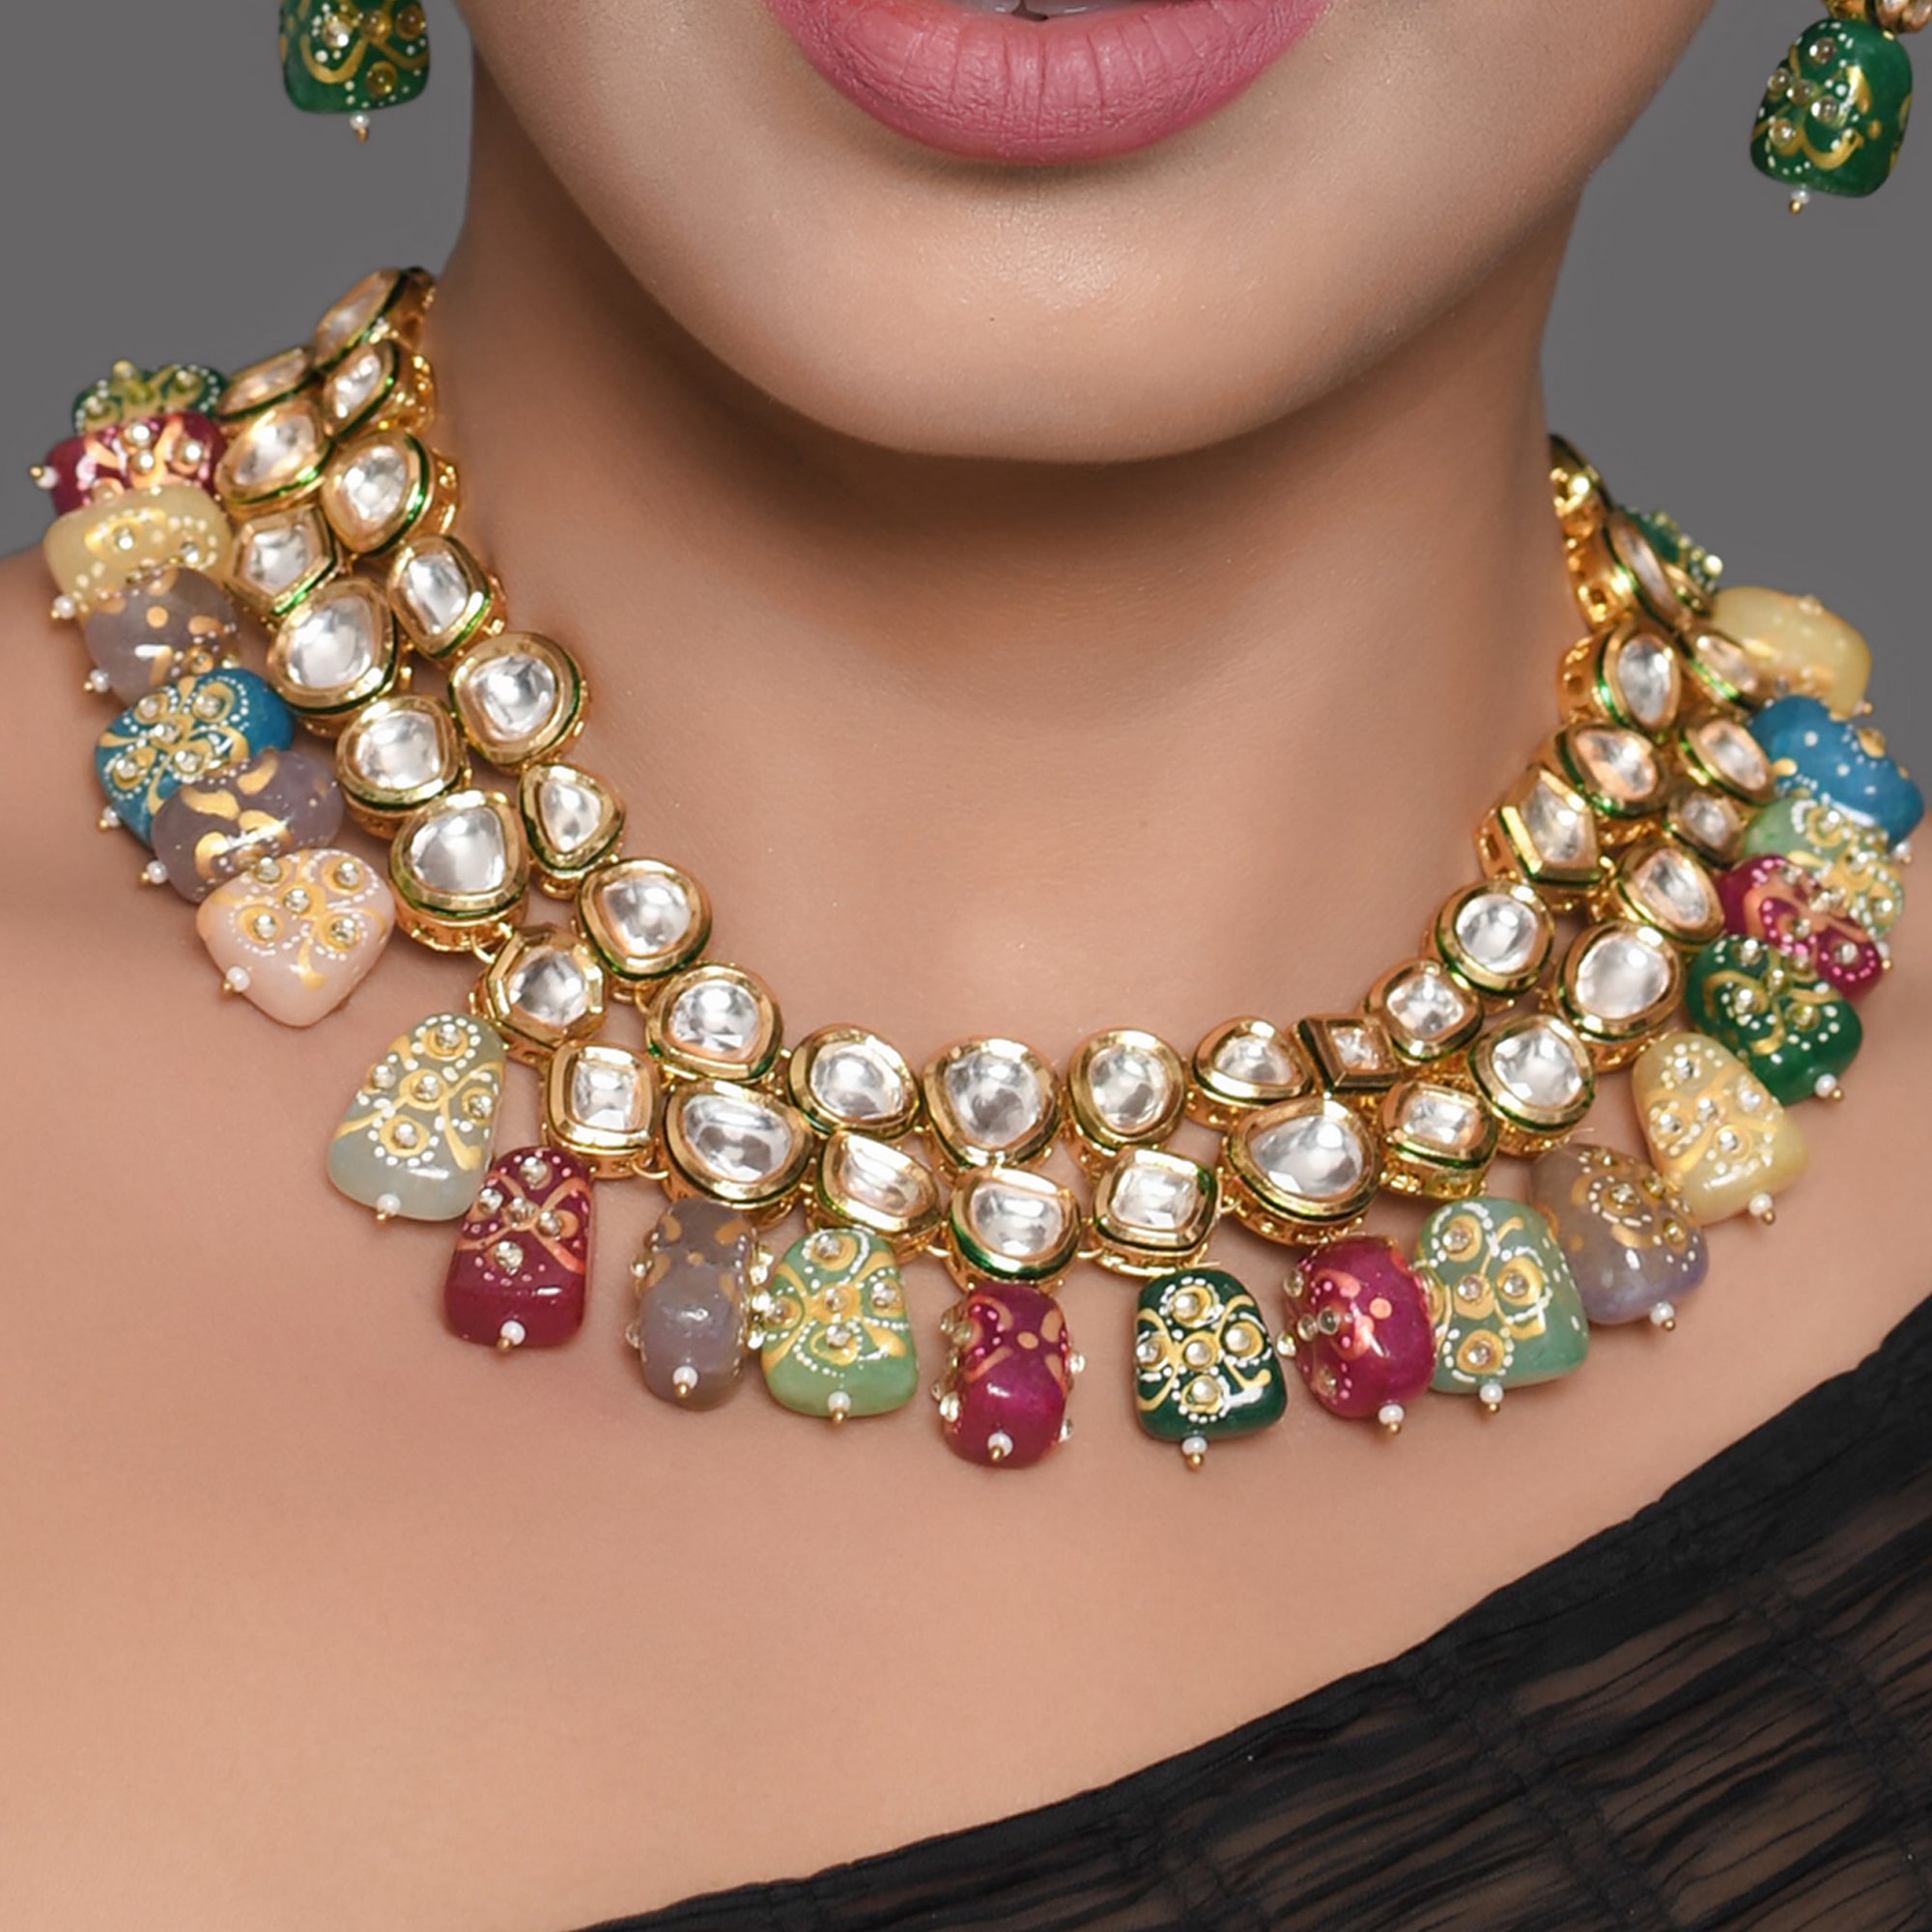 Gold toned multicolored beaded kundan necklace teamed with matching earrings & Maang Tikka